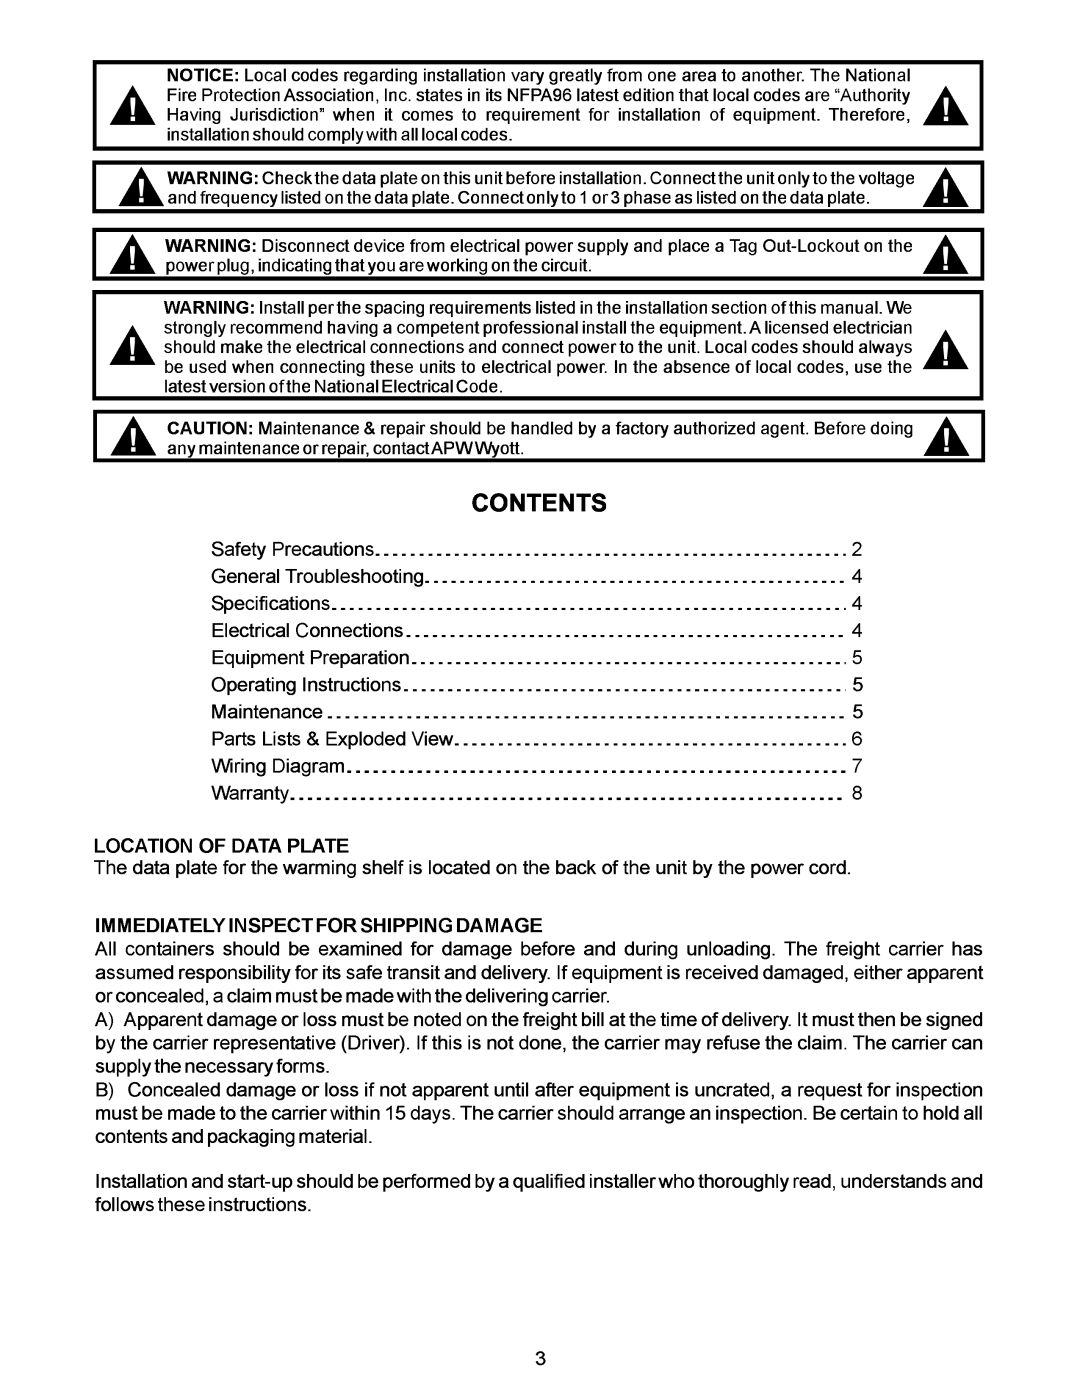 APW Wyott BW-30 operating instructions Contents 